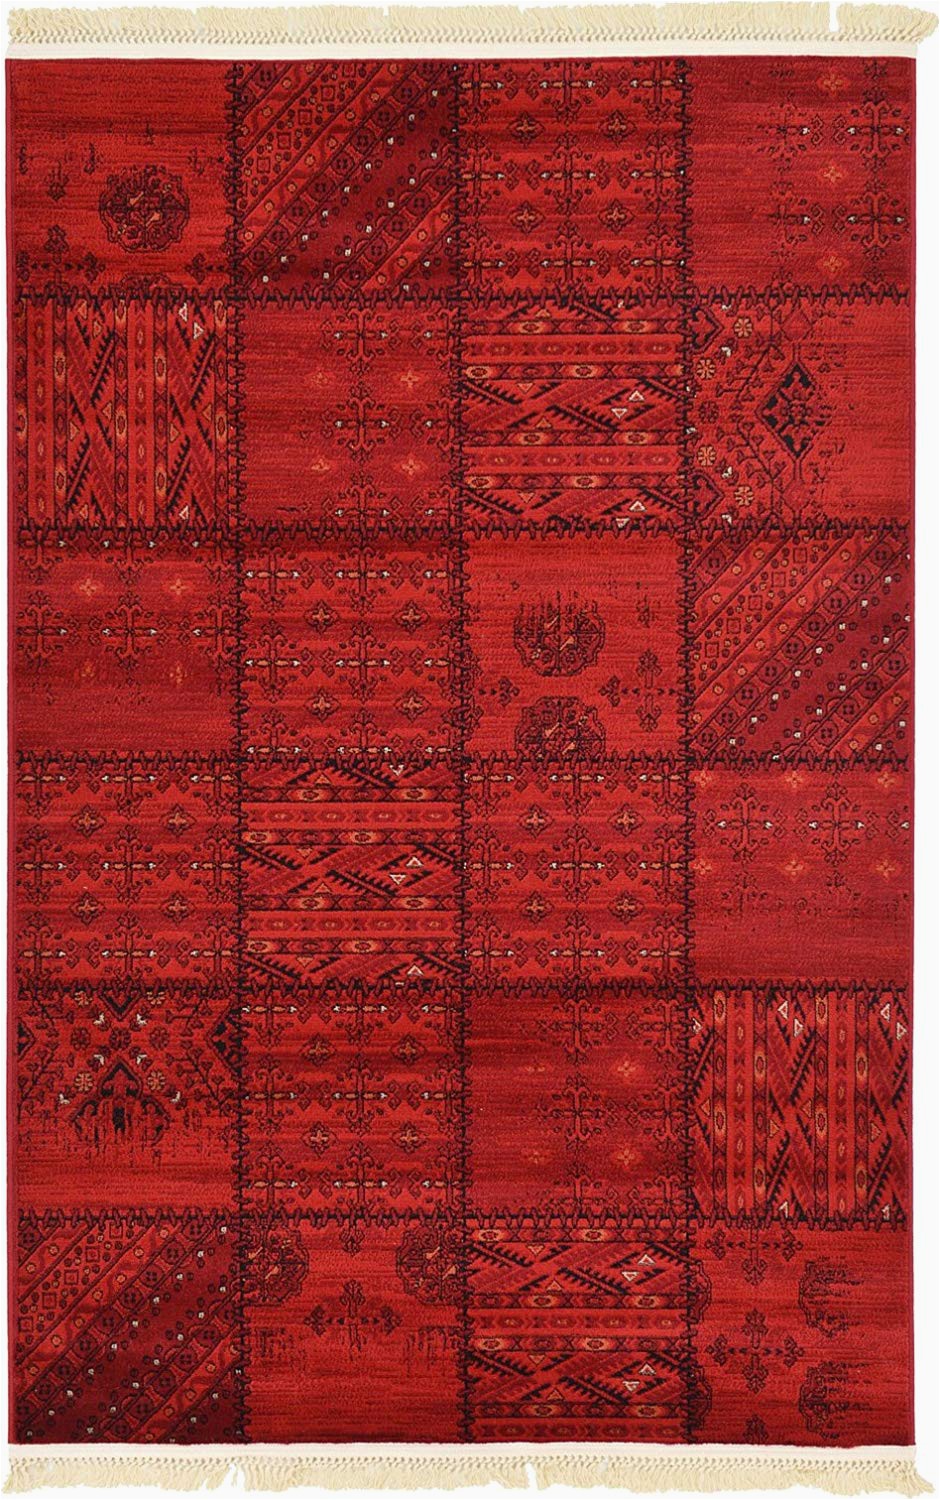 Cheap Red and Grey area Rugs Cheap Grey and Red area Rugs Find Grey and Red area Rugs